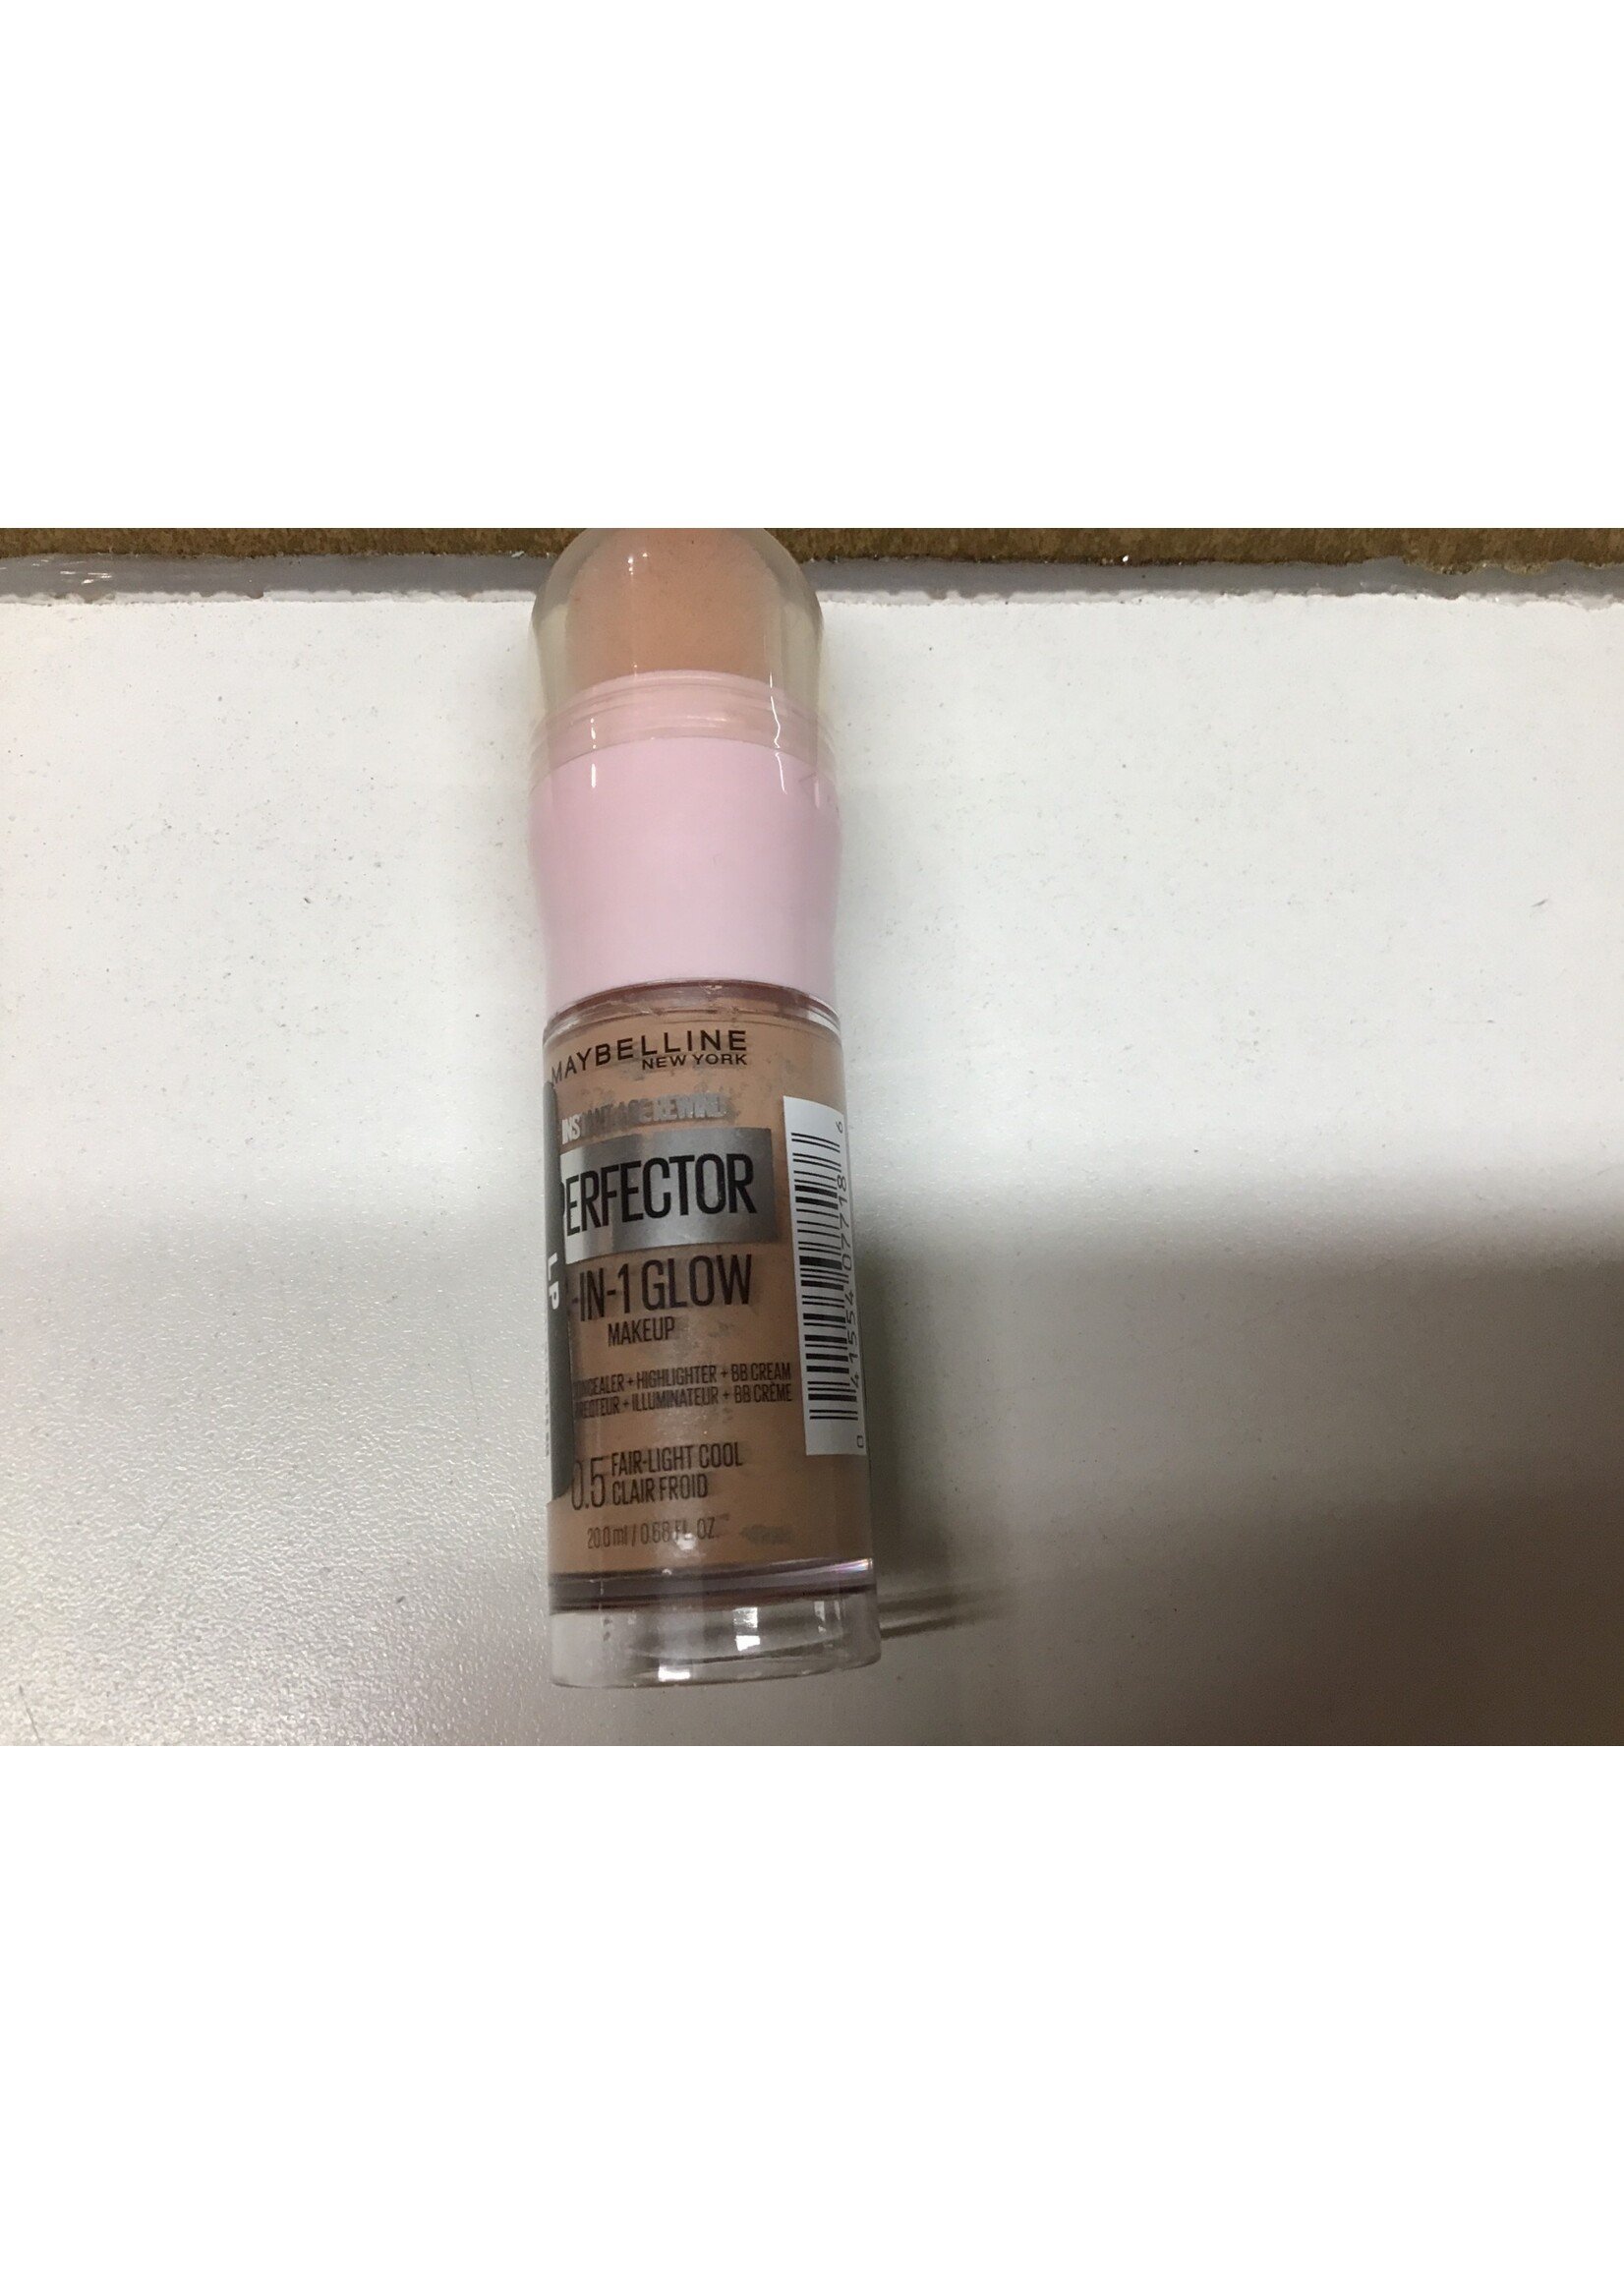 Open Maybelline Instant Age Rewind Instant Perfector 4-in-1 Glow Foundation Makeup - 0.5 Fair/Light Cool - 0.68 fl oz